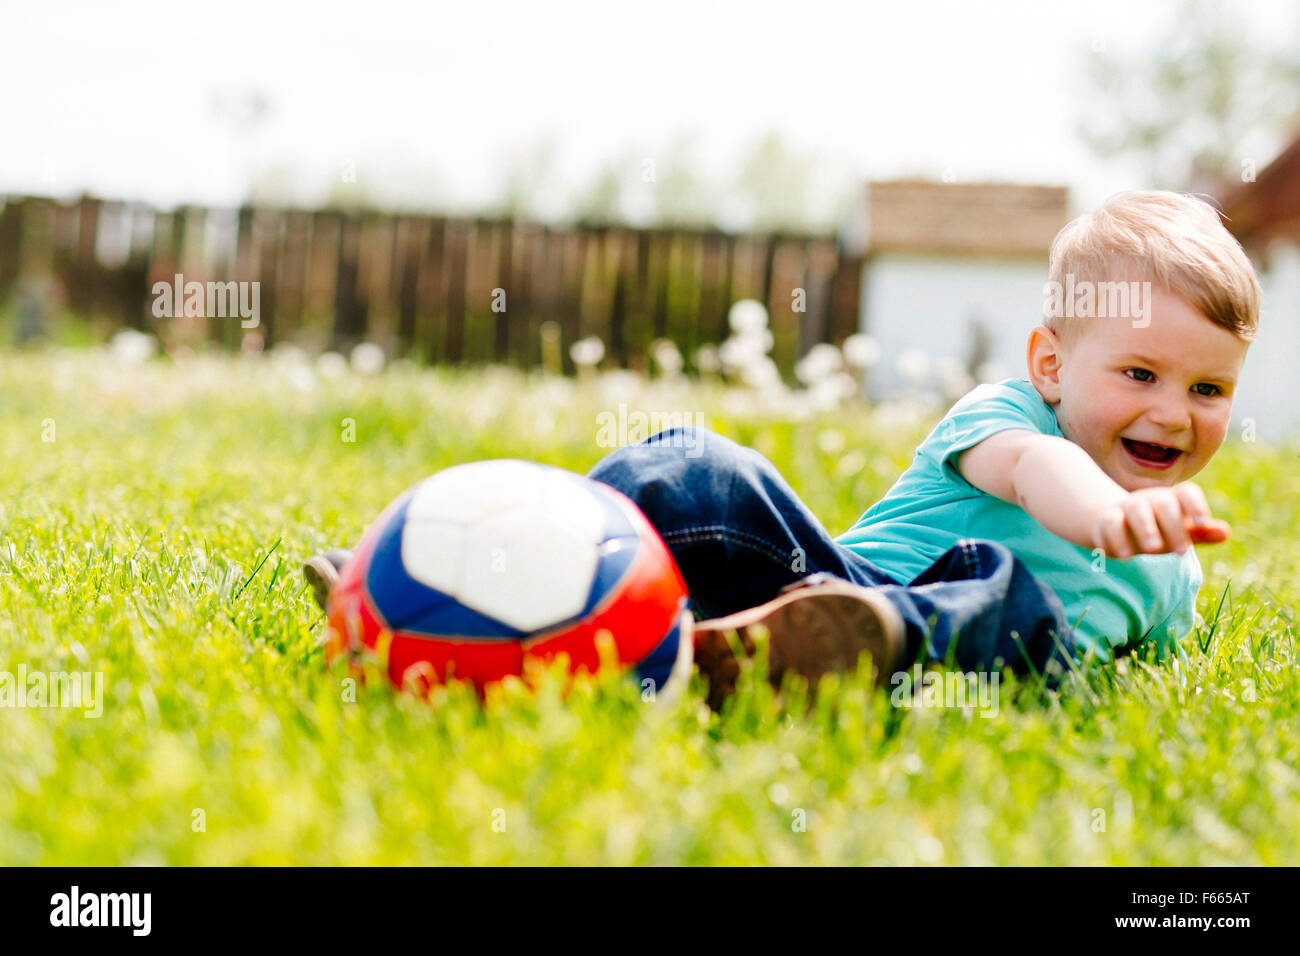 Adorable small boy playing with a soccer ball outdoors Stock Photo